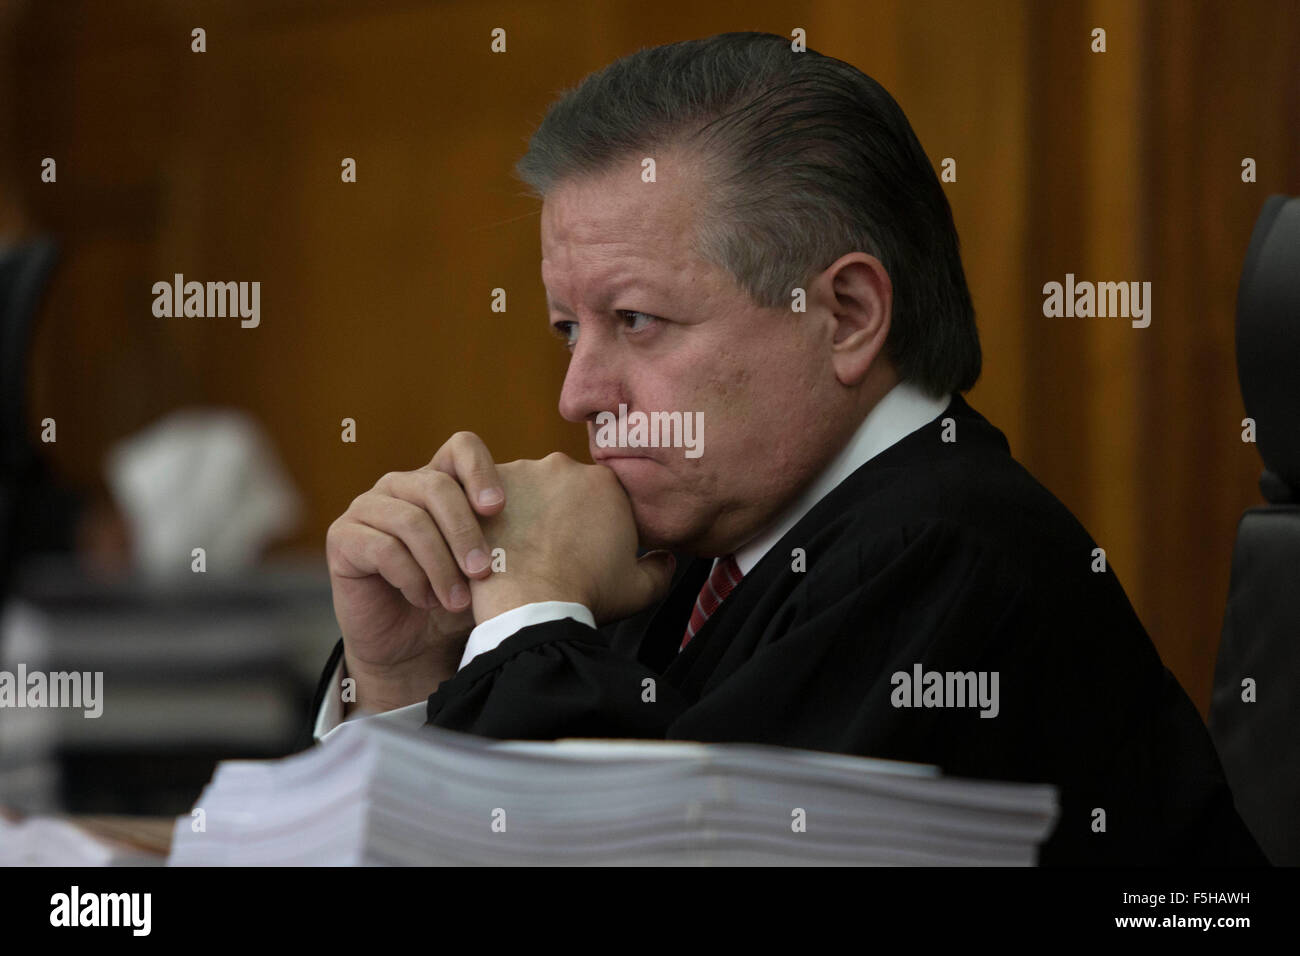 Mexico City, Mexico. 4th Nov, 2015. Supreme Court judge Arturo Zaldivar attends a session of the Supreme Court in Mexico City, capital of Mexico, on Nov. 4, 2015. Mexico's National Supreme Court of Justice approved a ruling of the cultivation, processing and personal consumption of marijuana with recreational and entertainment purposes on Wednesday. © Alejandro Ayala/Xinhua/Alamy Live News Stock Photo